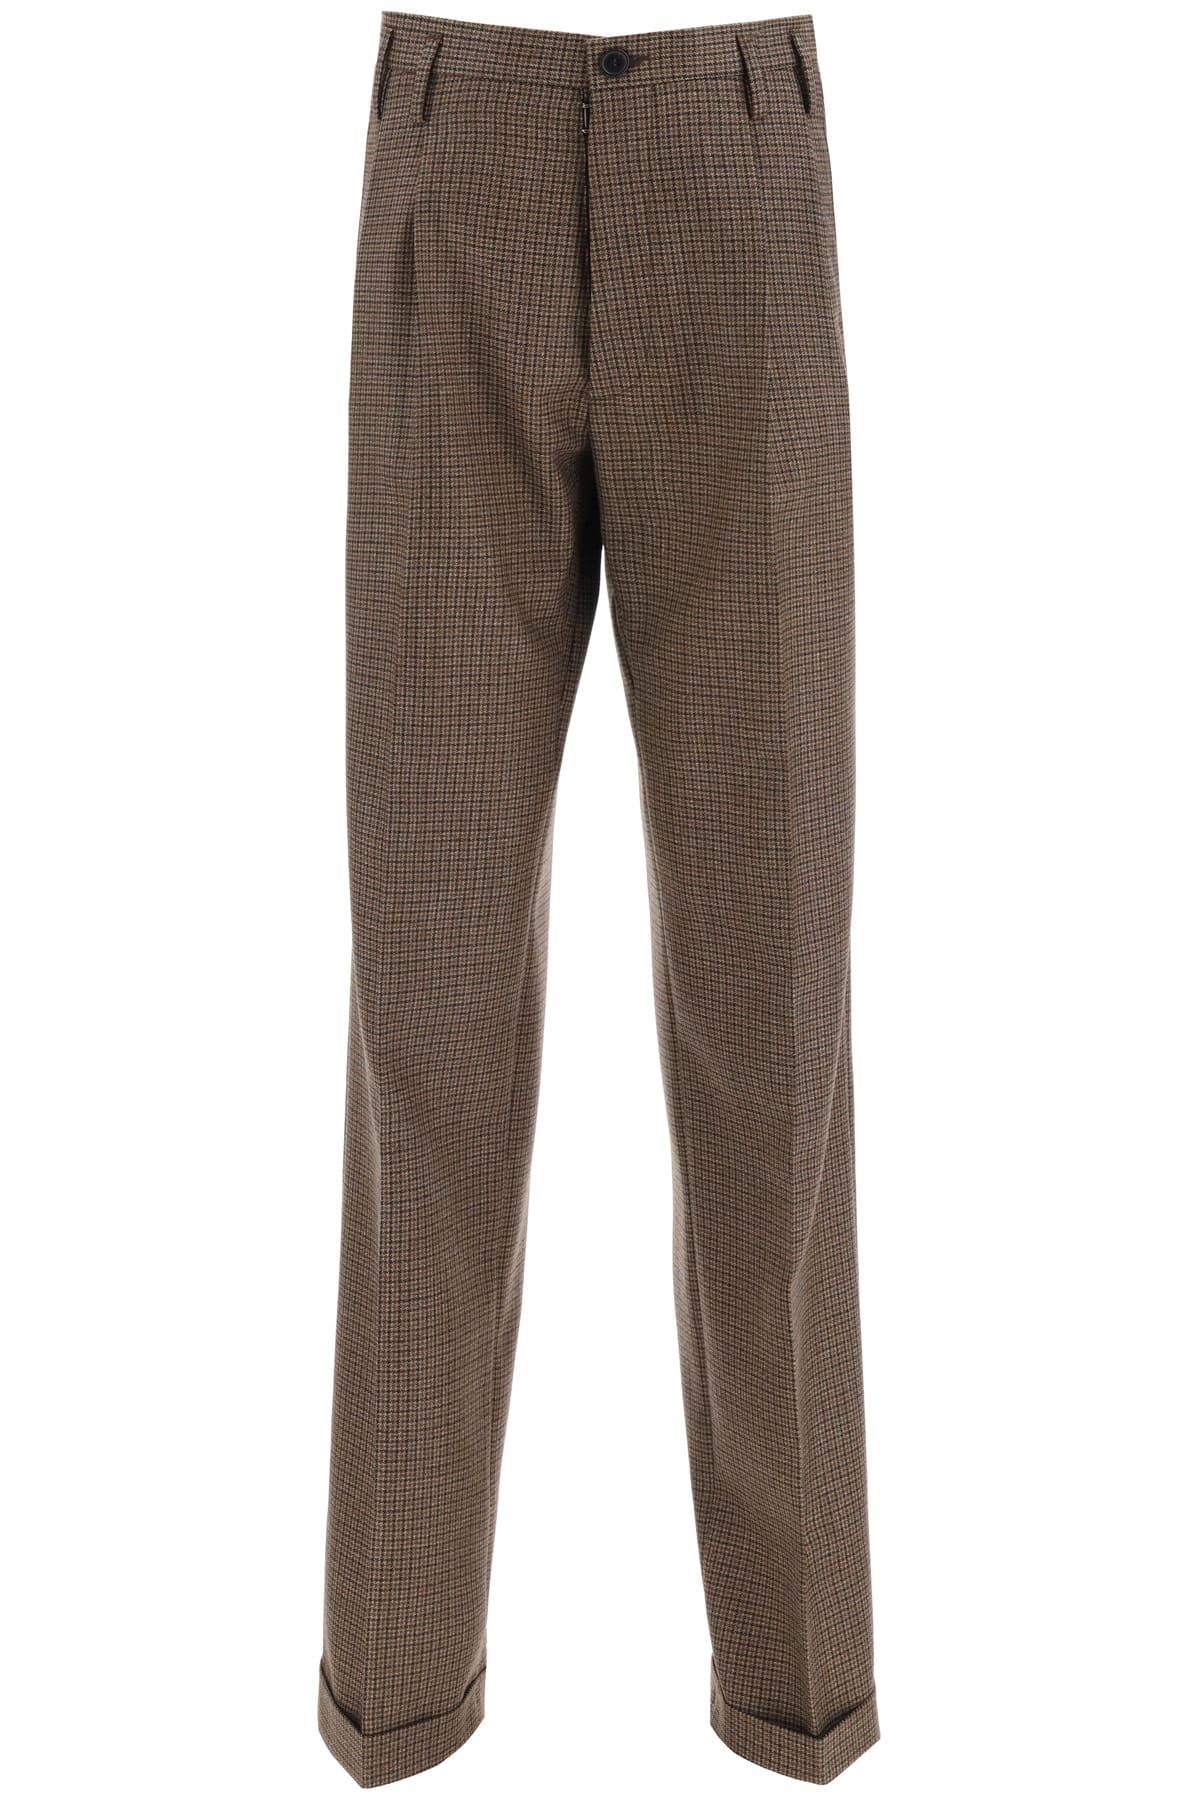 Maison Margiela Classic Houndstooth Trousers